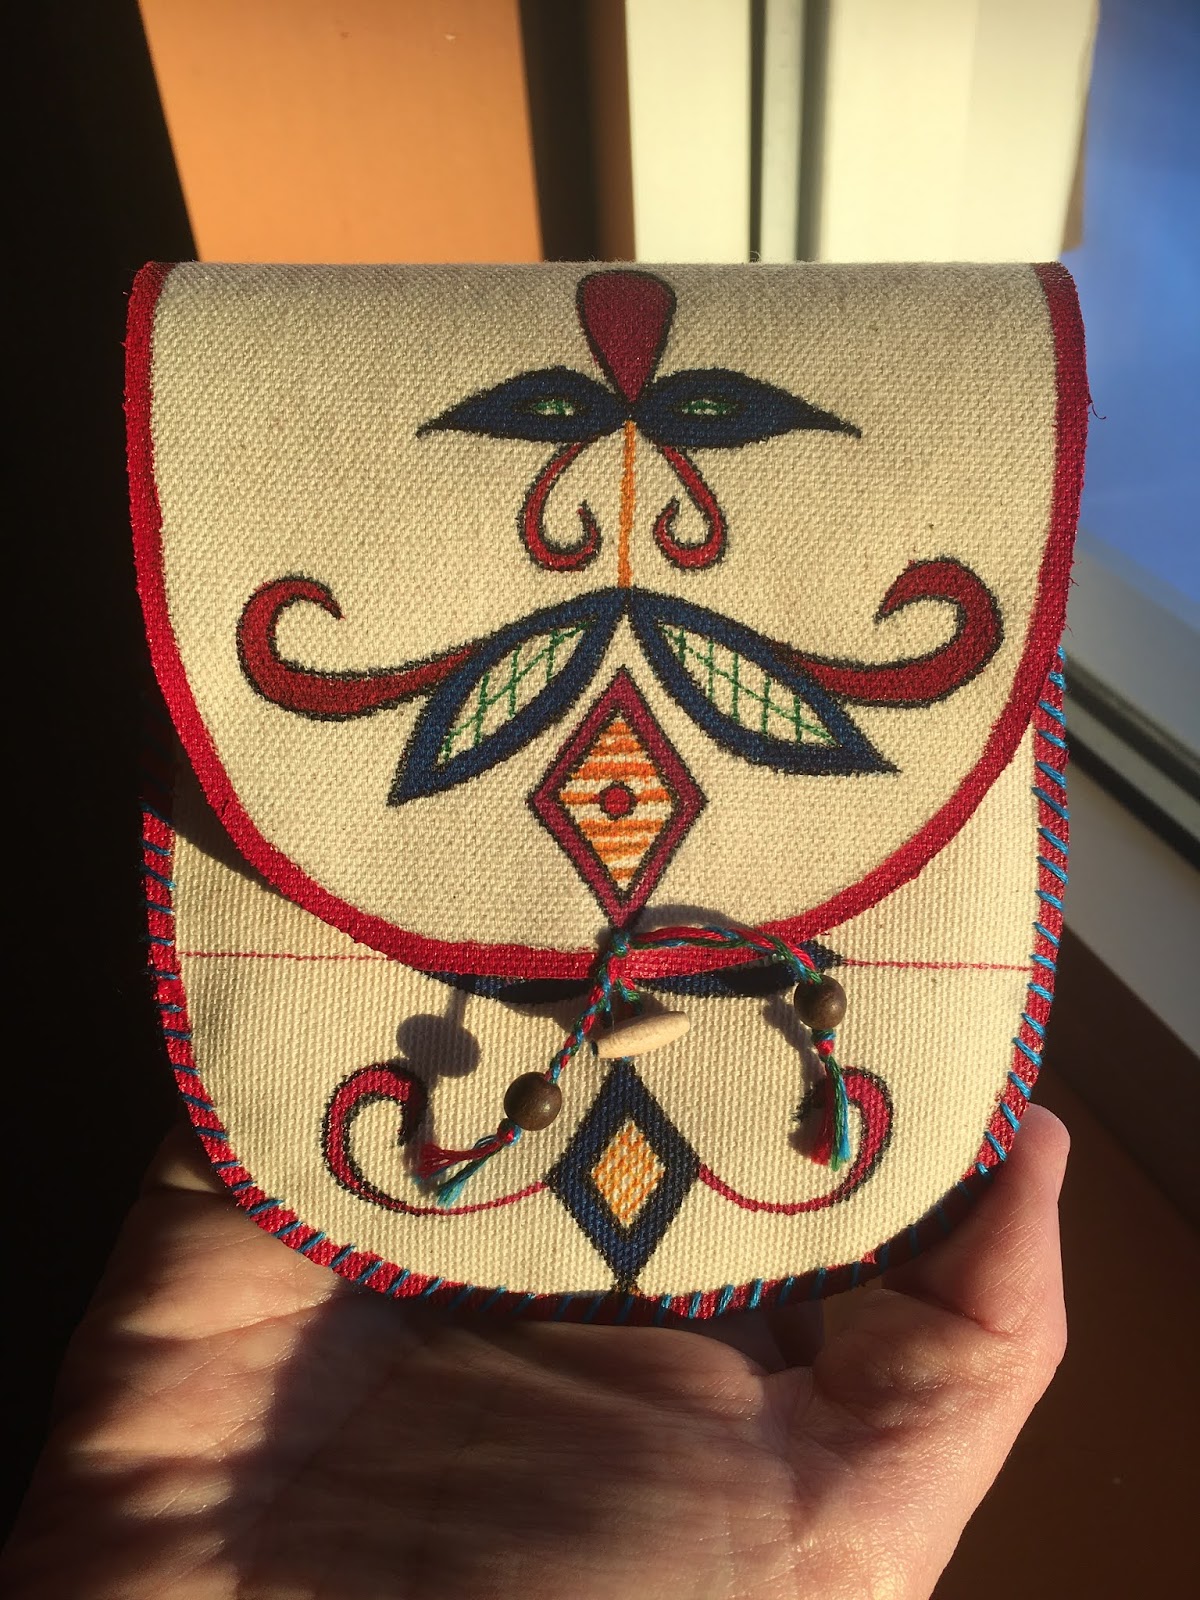 This is a small purse made by Trifona Simard. She decided to paint on canvas, as she wanted to explore her talent before committing to painting on caribou-skin. Before she painted on the canvas, she practiced painting designs on paper until she gained confidence in handling the paint and the tools.